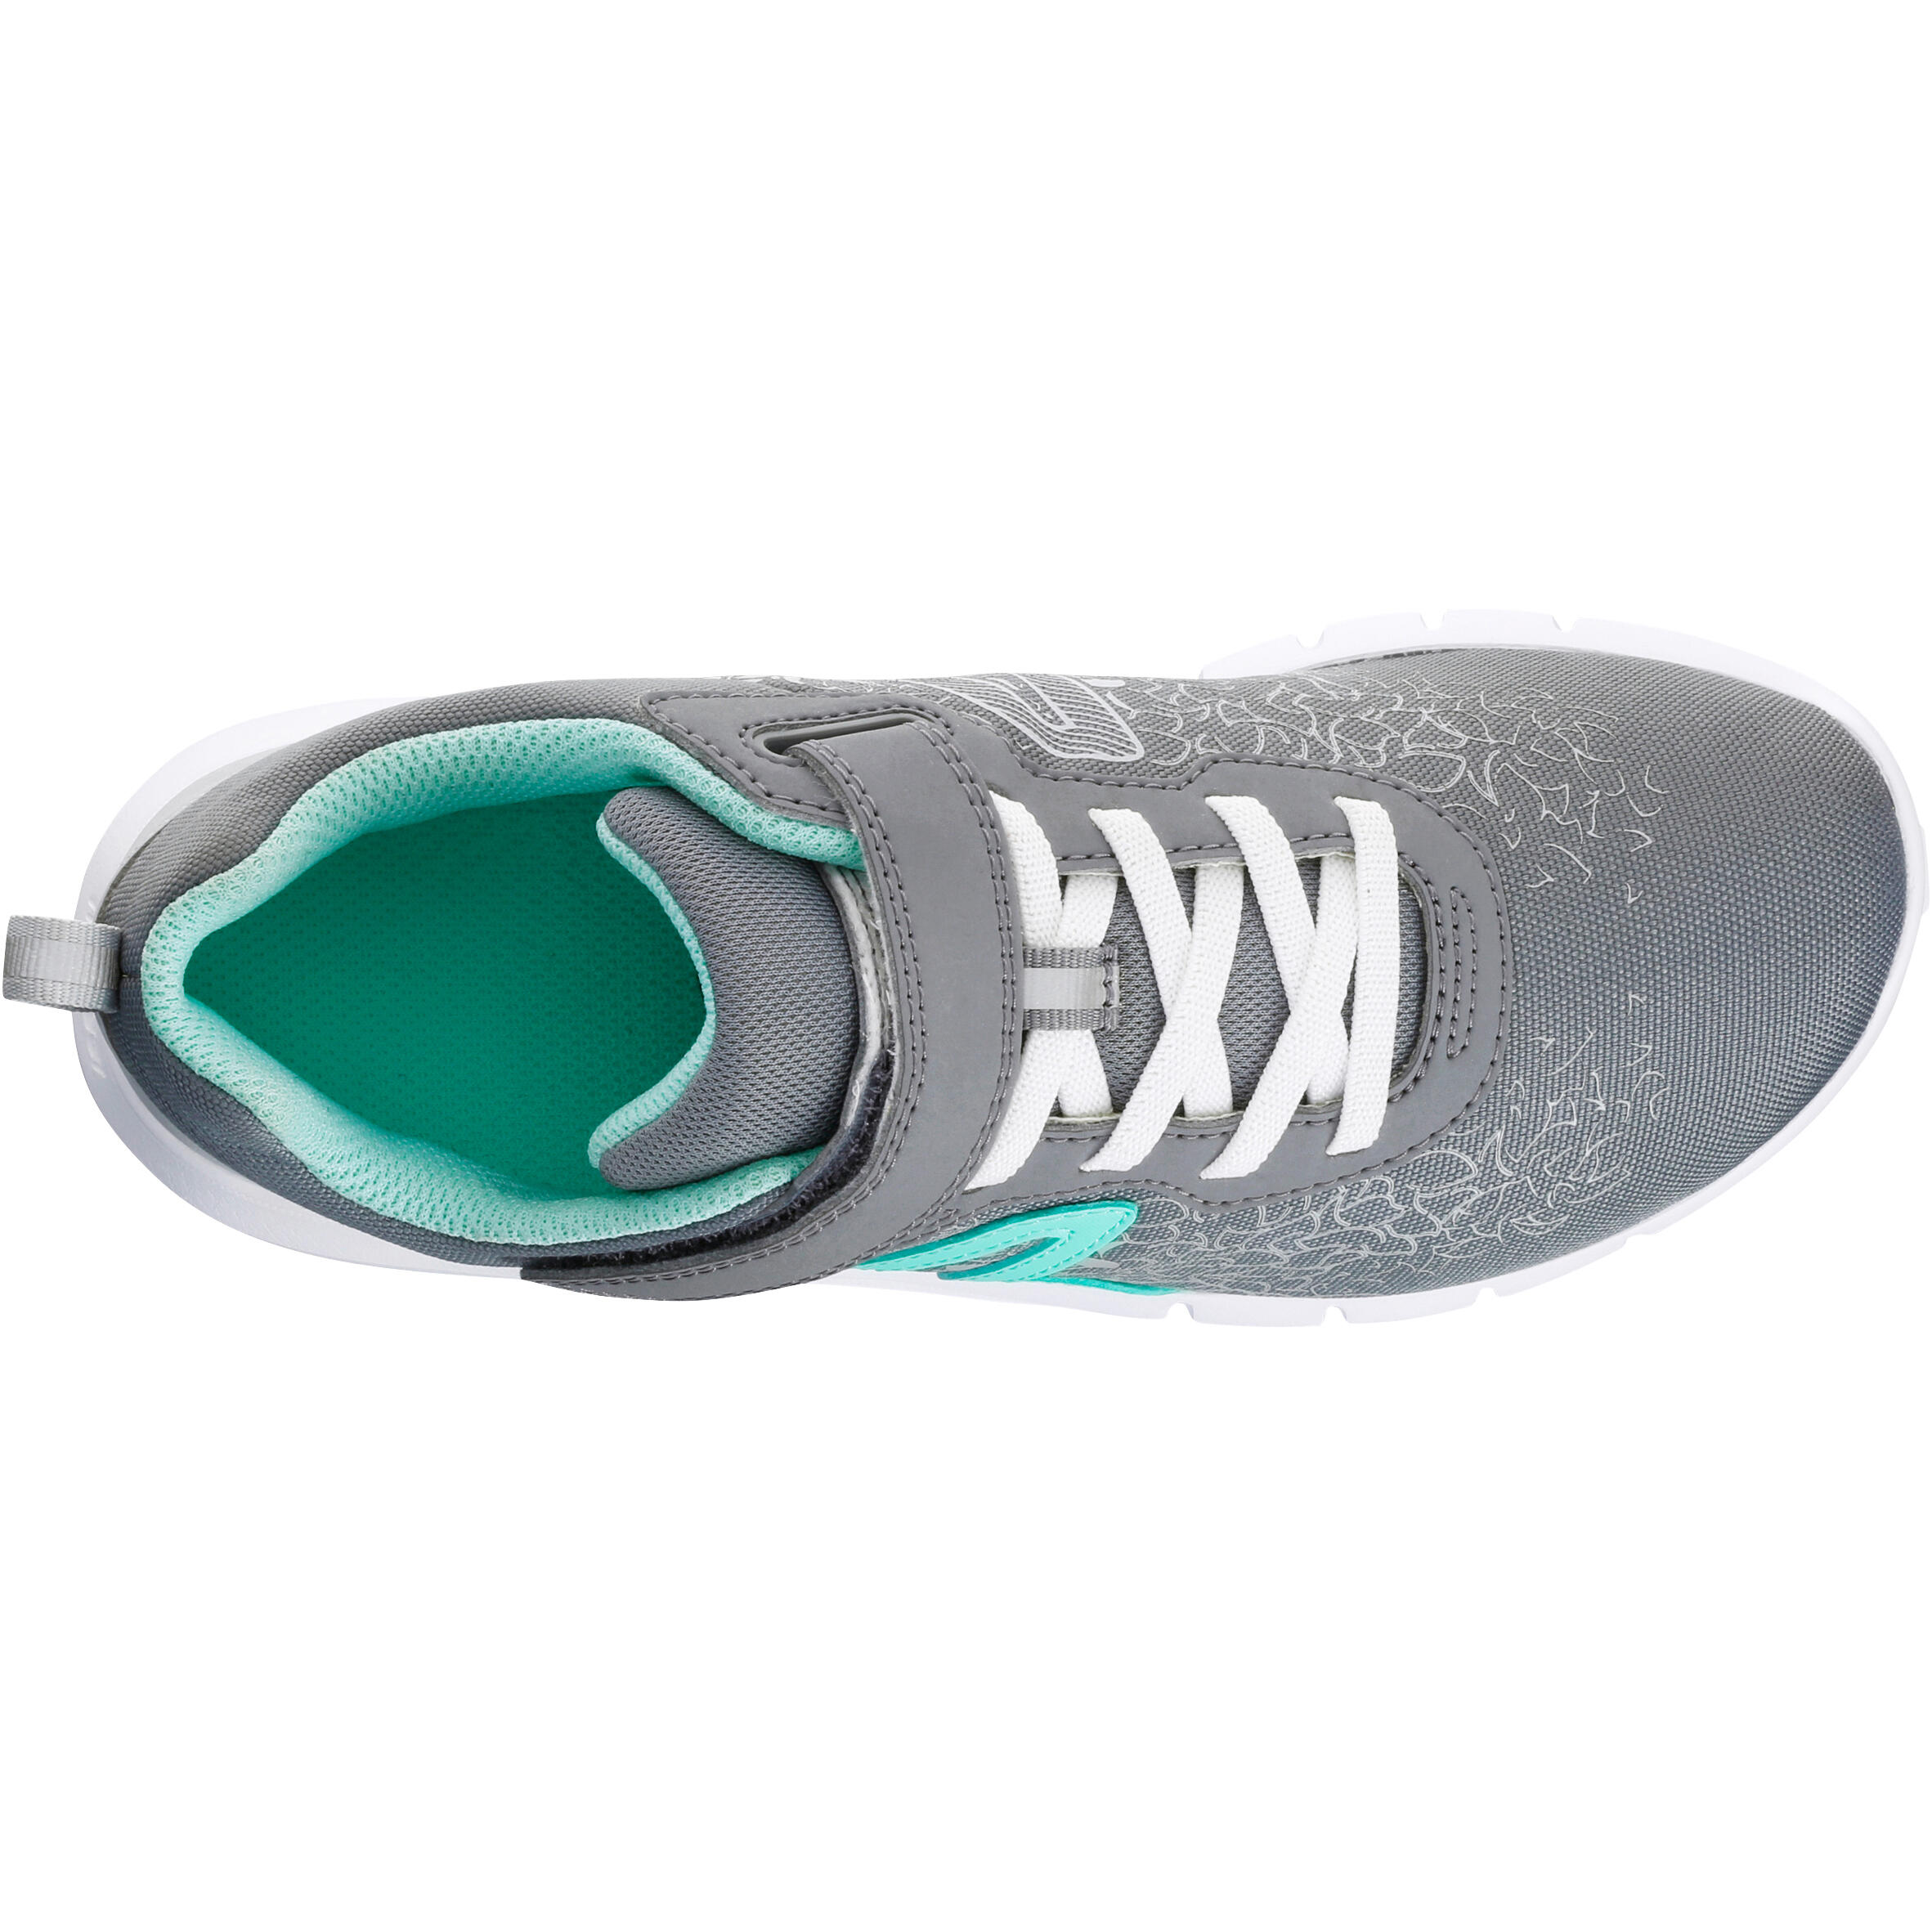 Soft 140 children's fitness walking shoes grey/turquoise 7/12